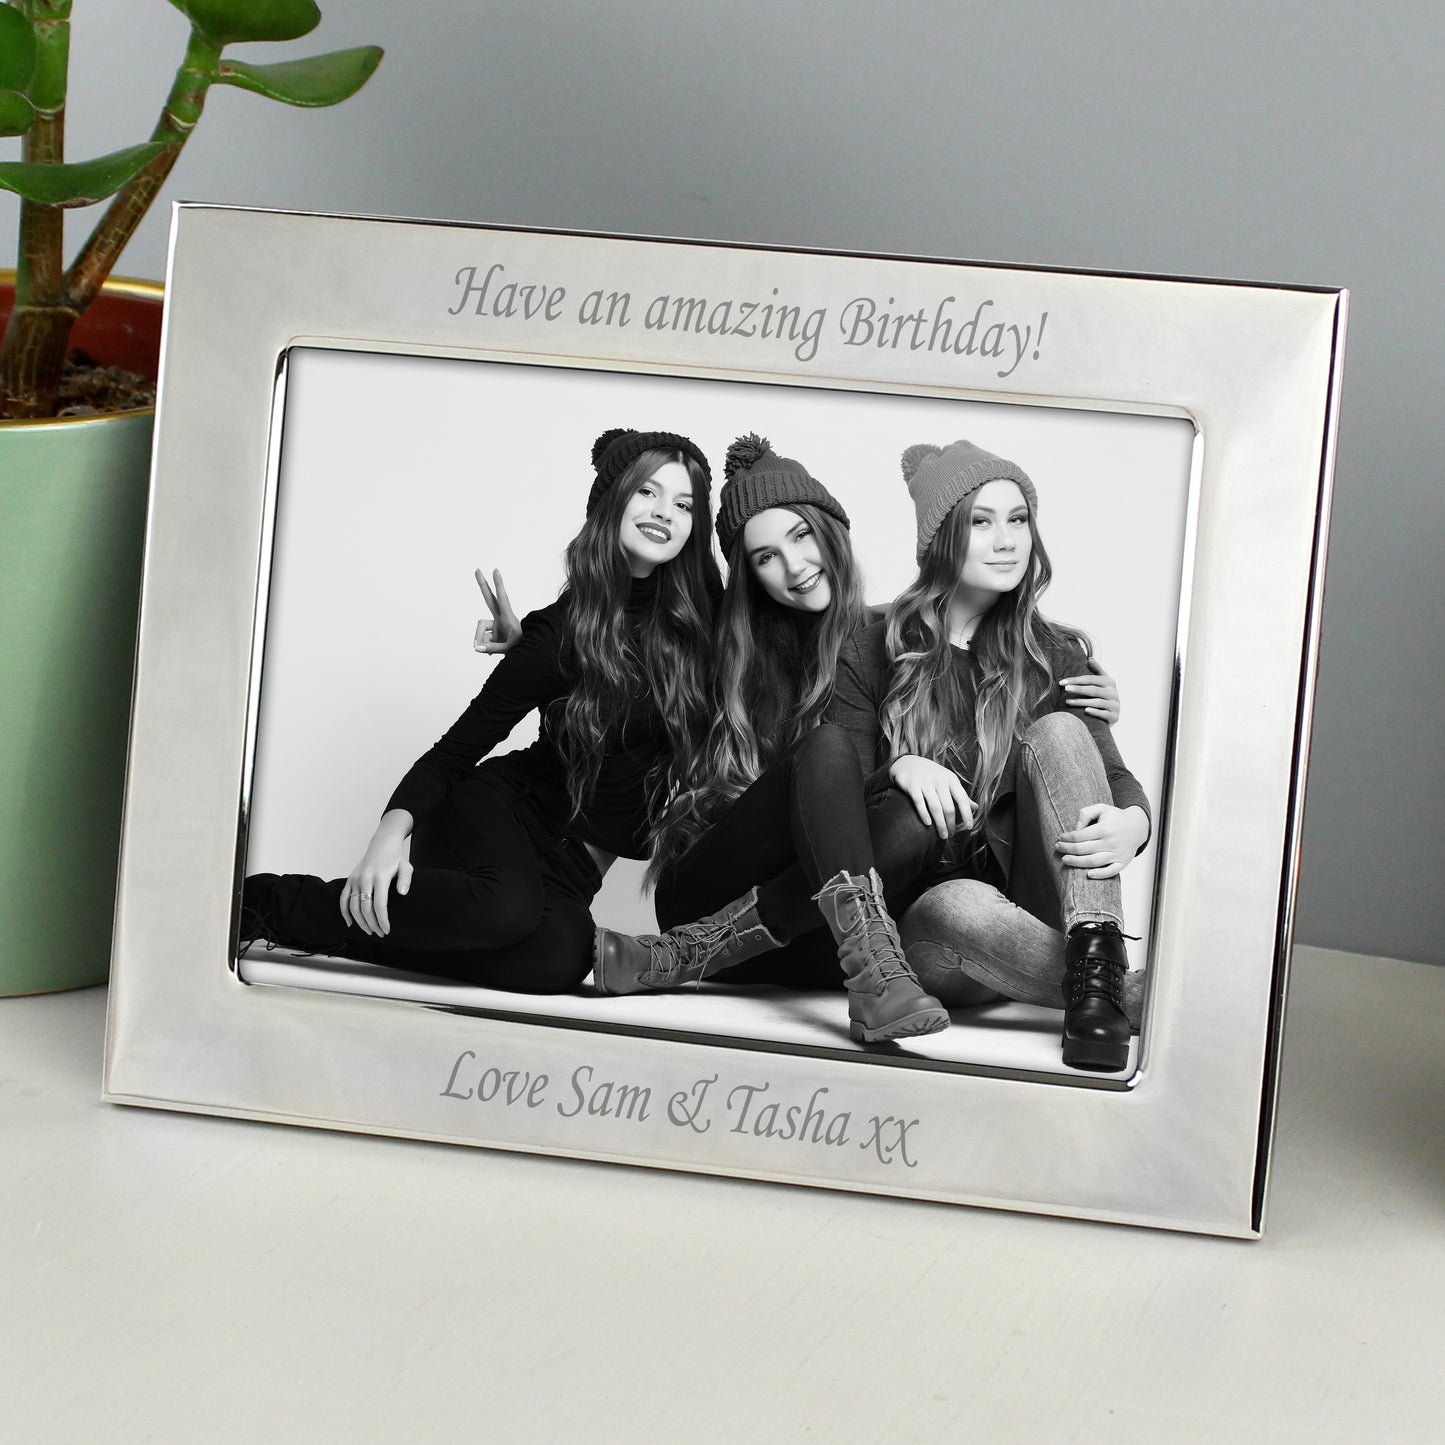 Personalised Silver Plated 7x5 Landscape Photo Frame - Personalise It!